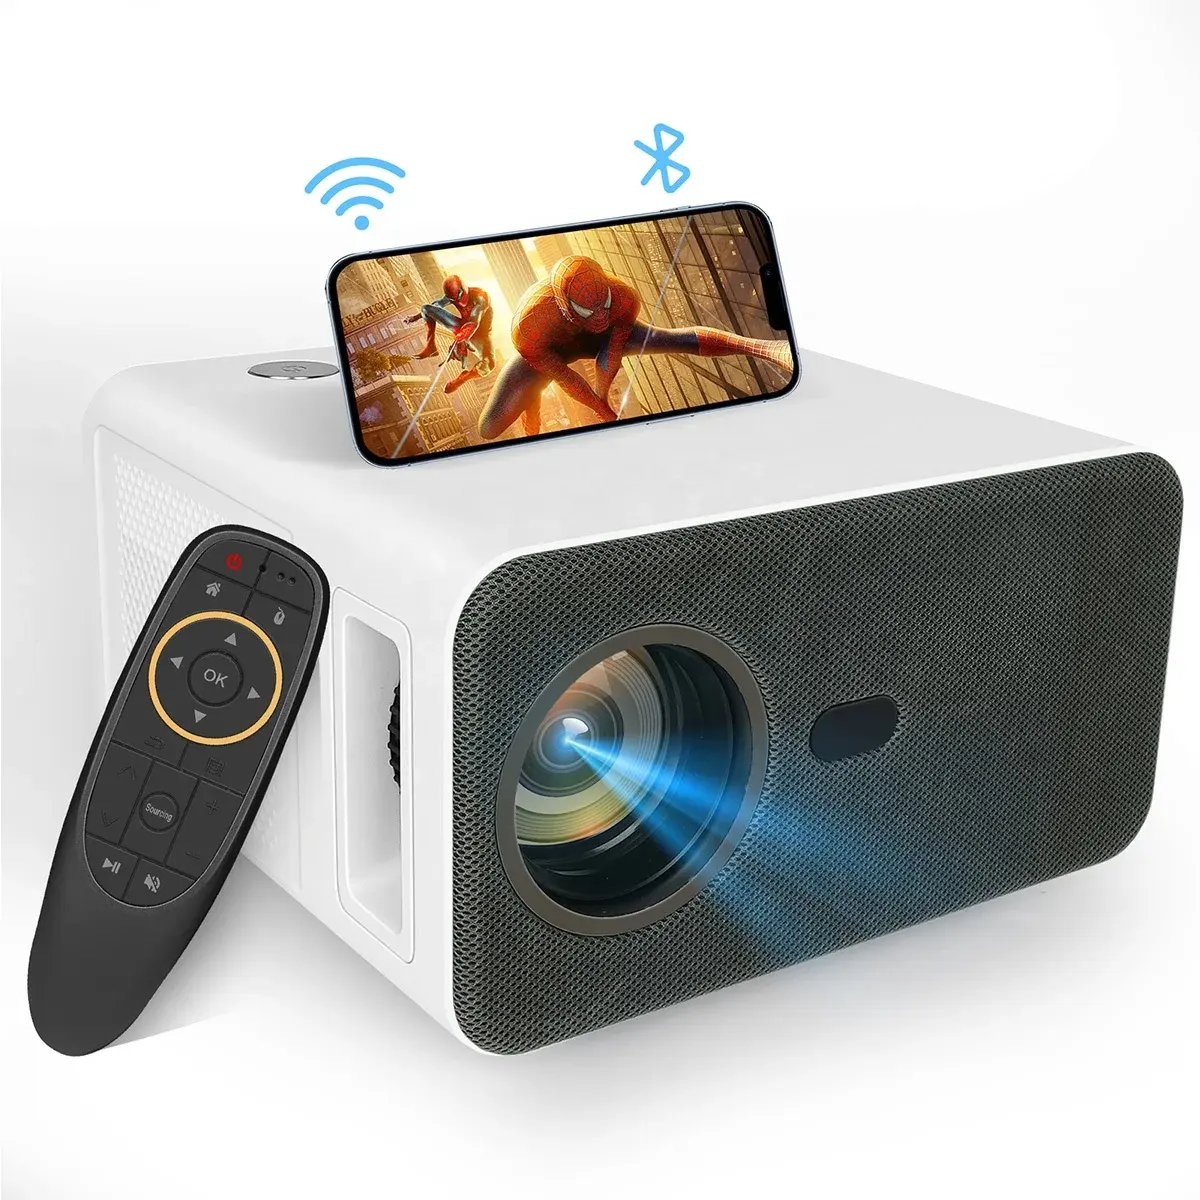 Draagbare Projector Voor Xiaomi 5G Wifi 2 + 16G Ram Rom 15000 Lumen Full Hd Lcd 300Inch Scherm Home Theater Led 1080P Projector